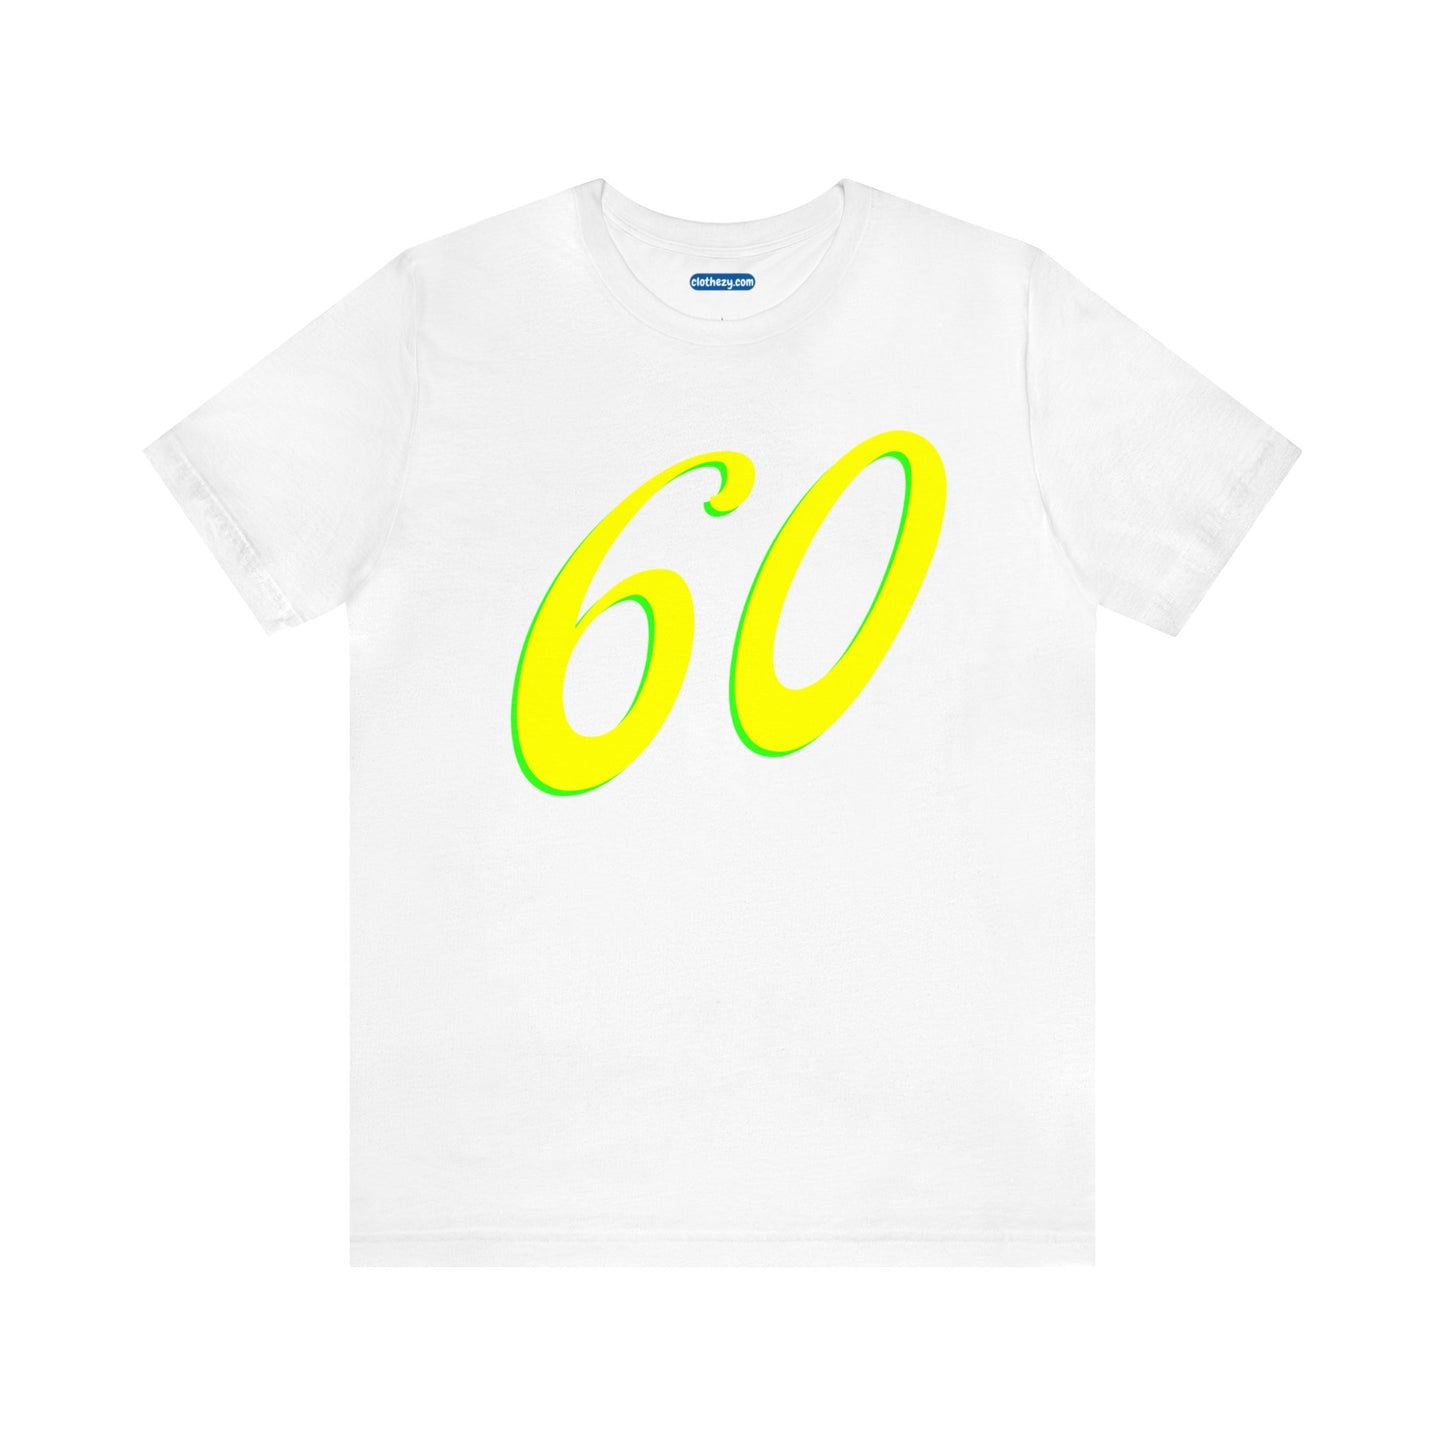 Number 60 Design - Soft Cotton Tee for birthdays and celebrations, Gift for friends and family, Multiple Options by clothezy.com in White Size Small - Buy Now